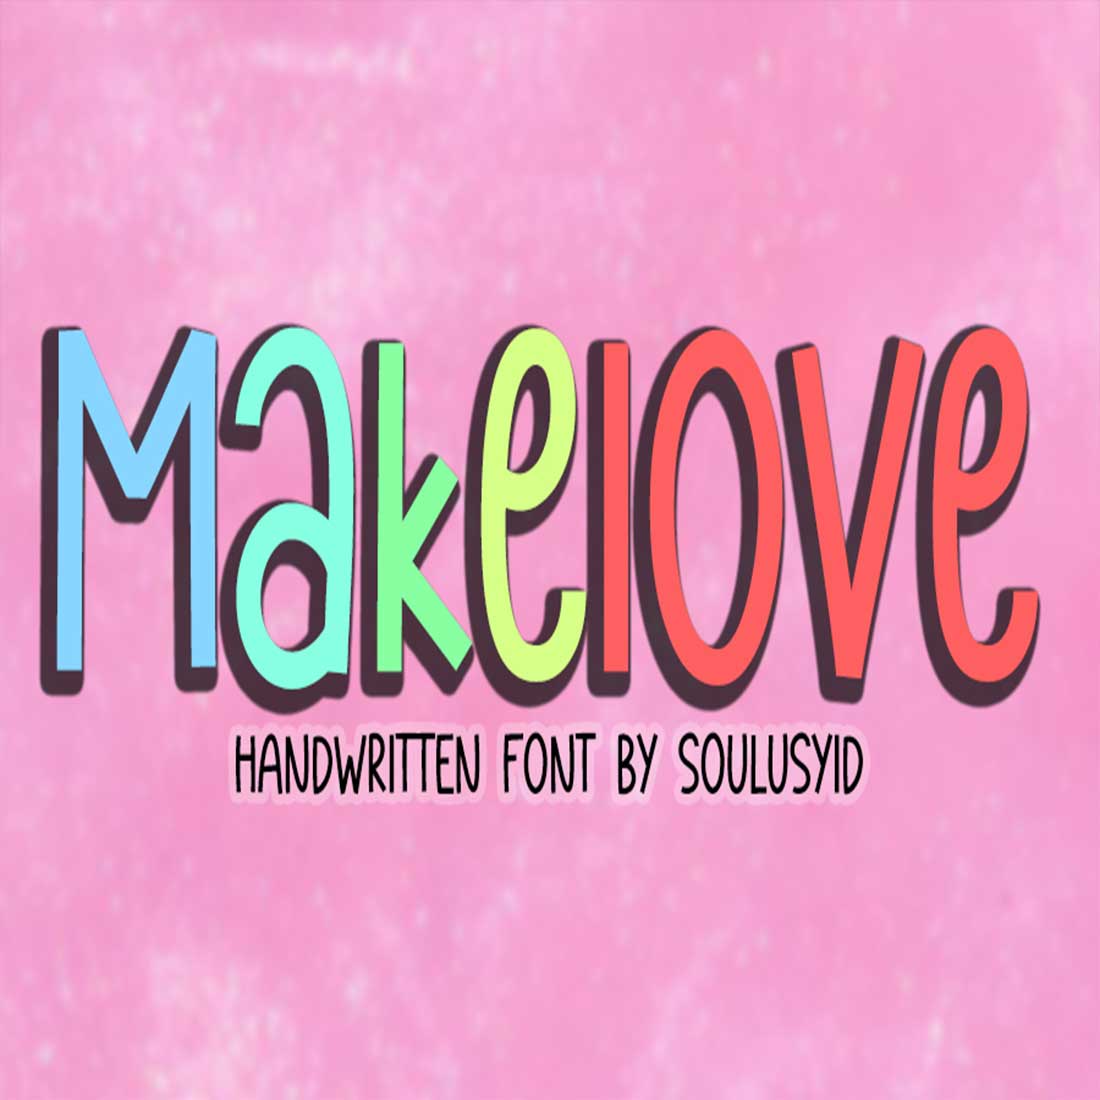 Makelove cover image.